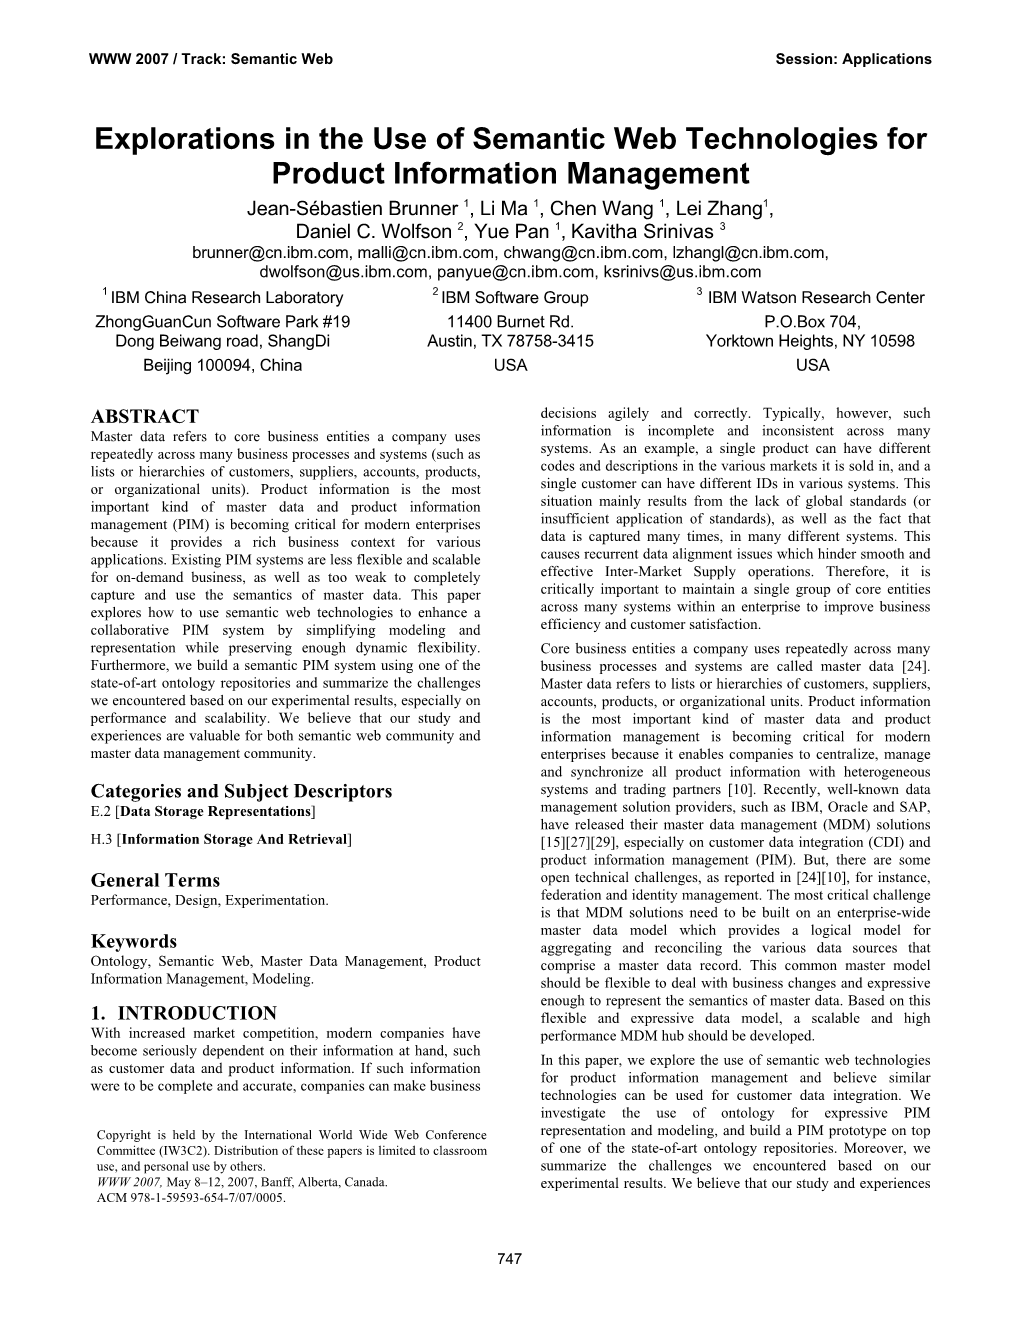 Explorations in the Use of Semantic Web Technologies for Product Information Management Jean-Sébastien Brunner 1, Li Ma 1, Chen Wang 1, Lei Zhang1, Daniel C